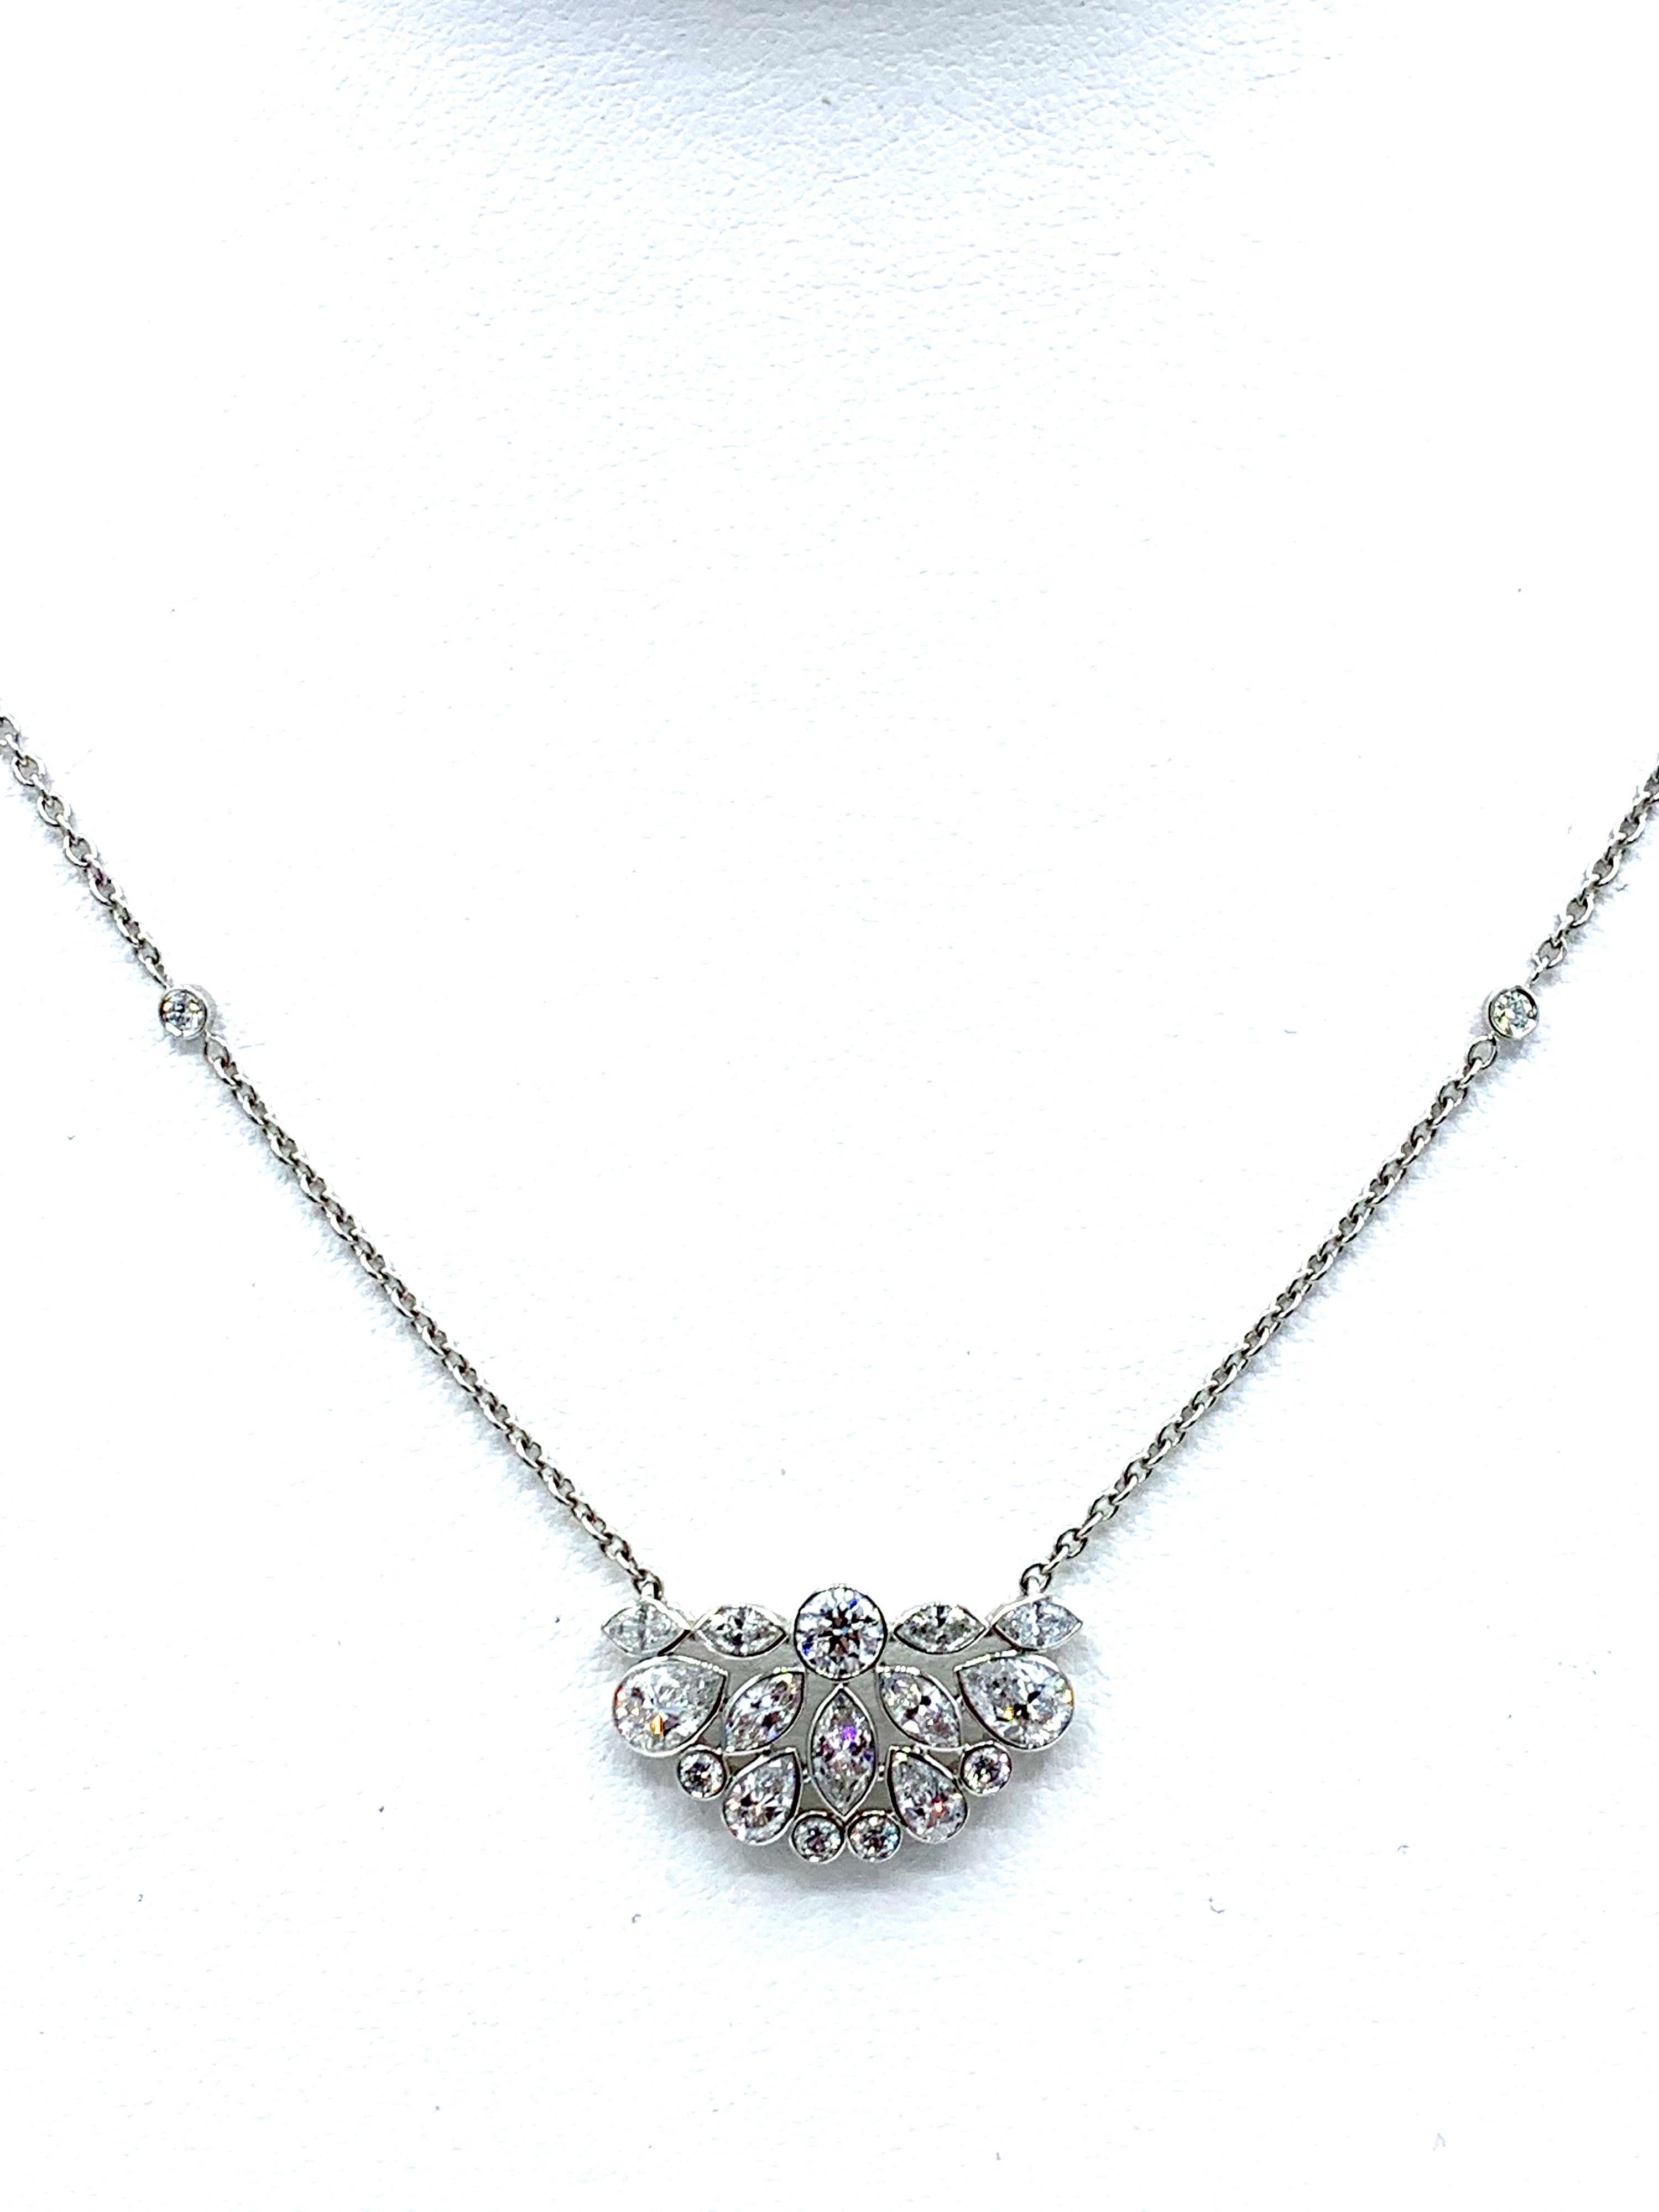 An absolutely gorgeous Robert Procop De La Vie Collection Diamond cluster pendant! The pendant necklace is handcrafted in platinum with beautifully cut Diamonds. There are 26 various shaped white Diamonds weighing 2.31 carats make up this easy to